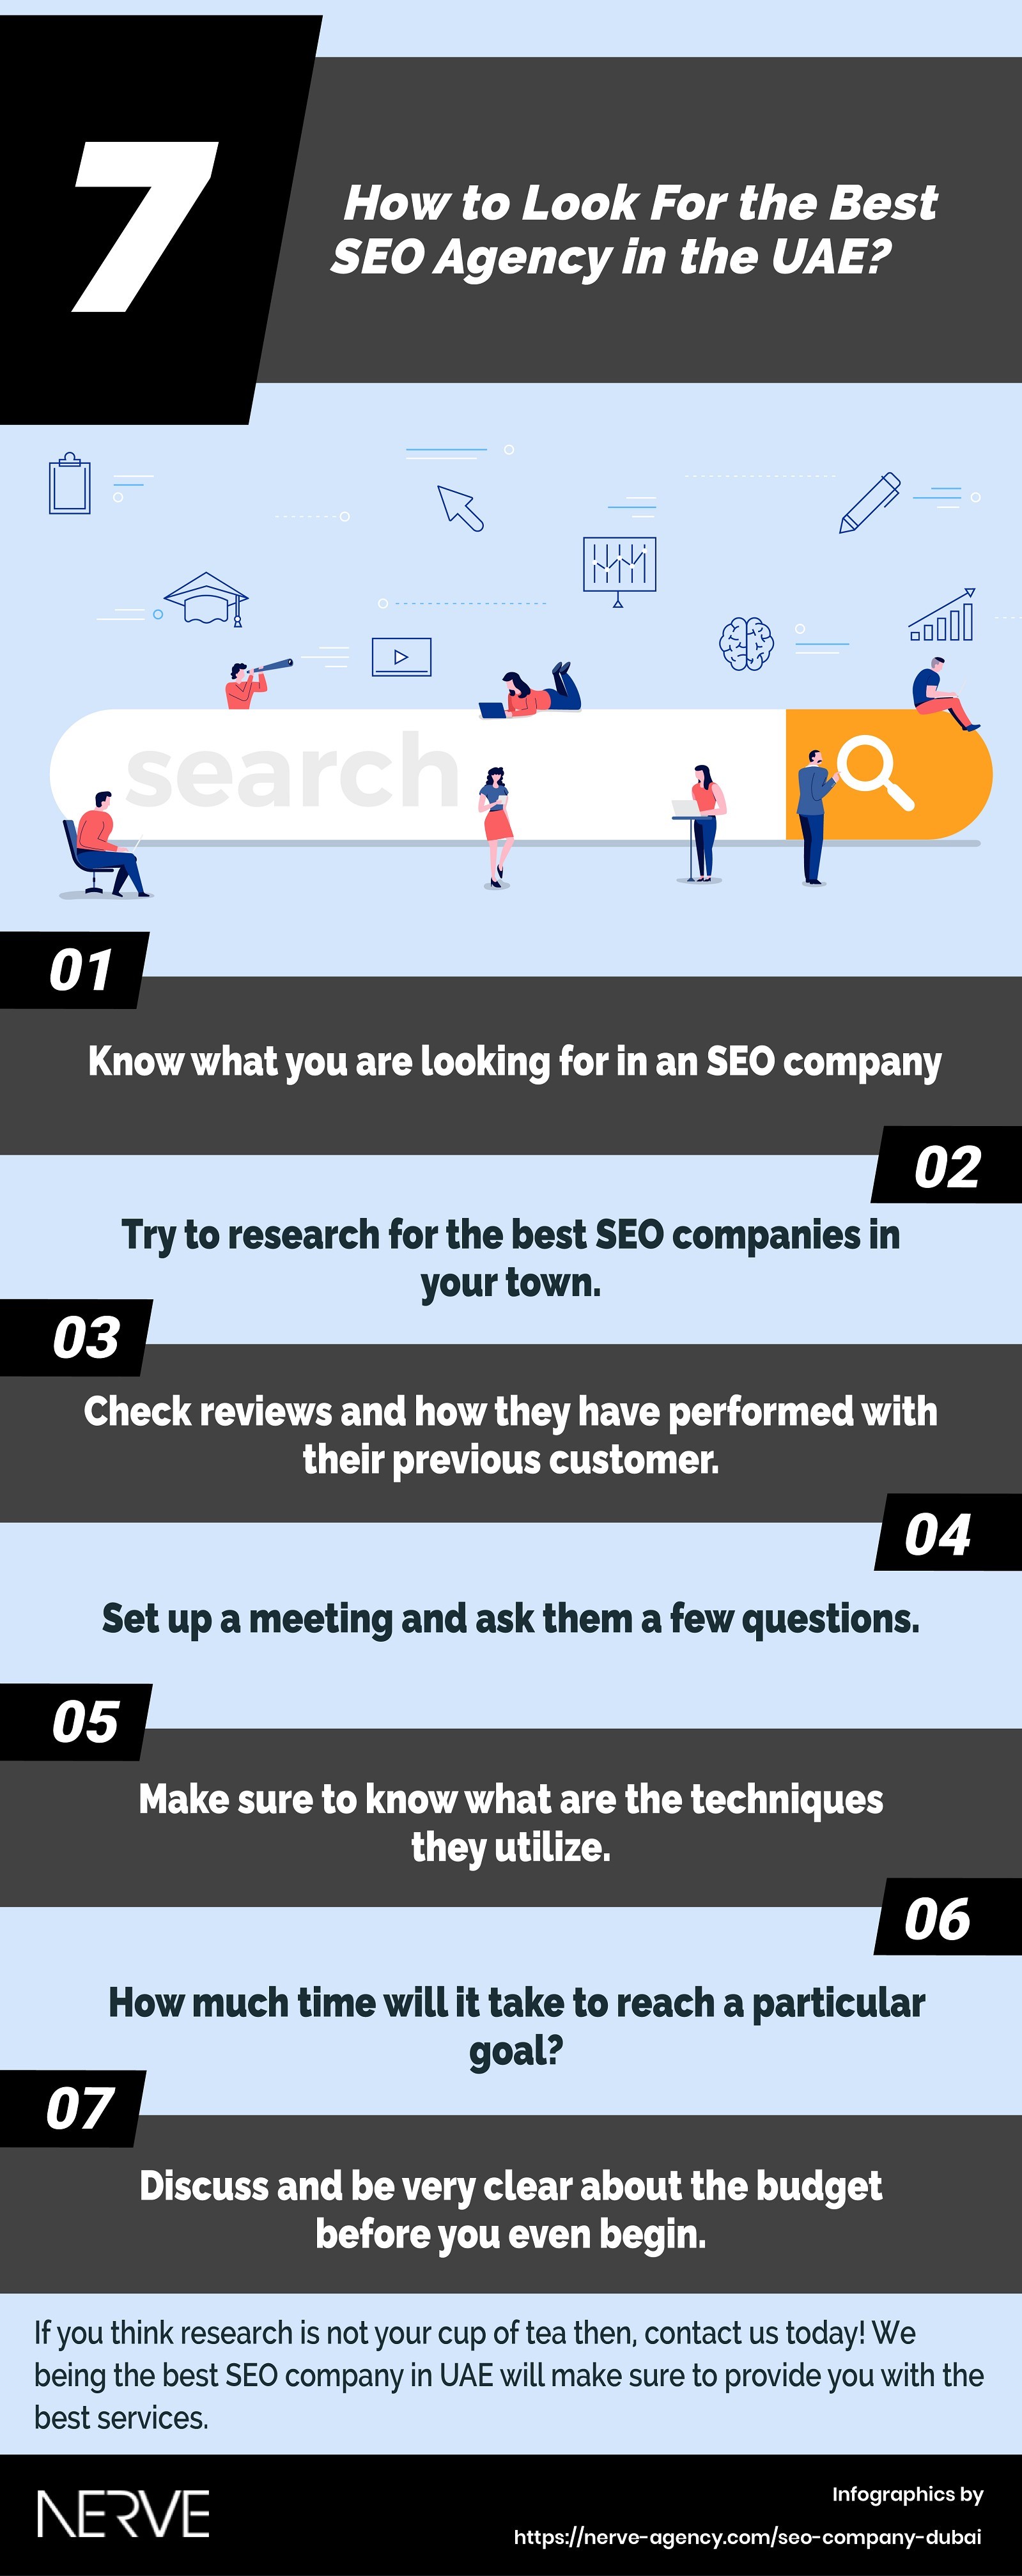 How to Look For the Best SEO Agency in the UAE?